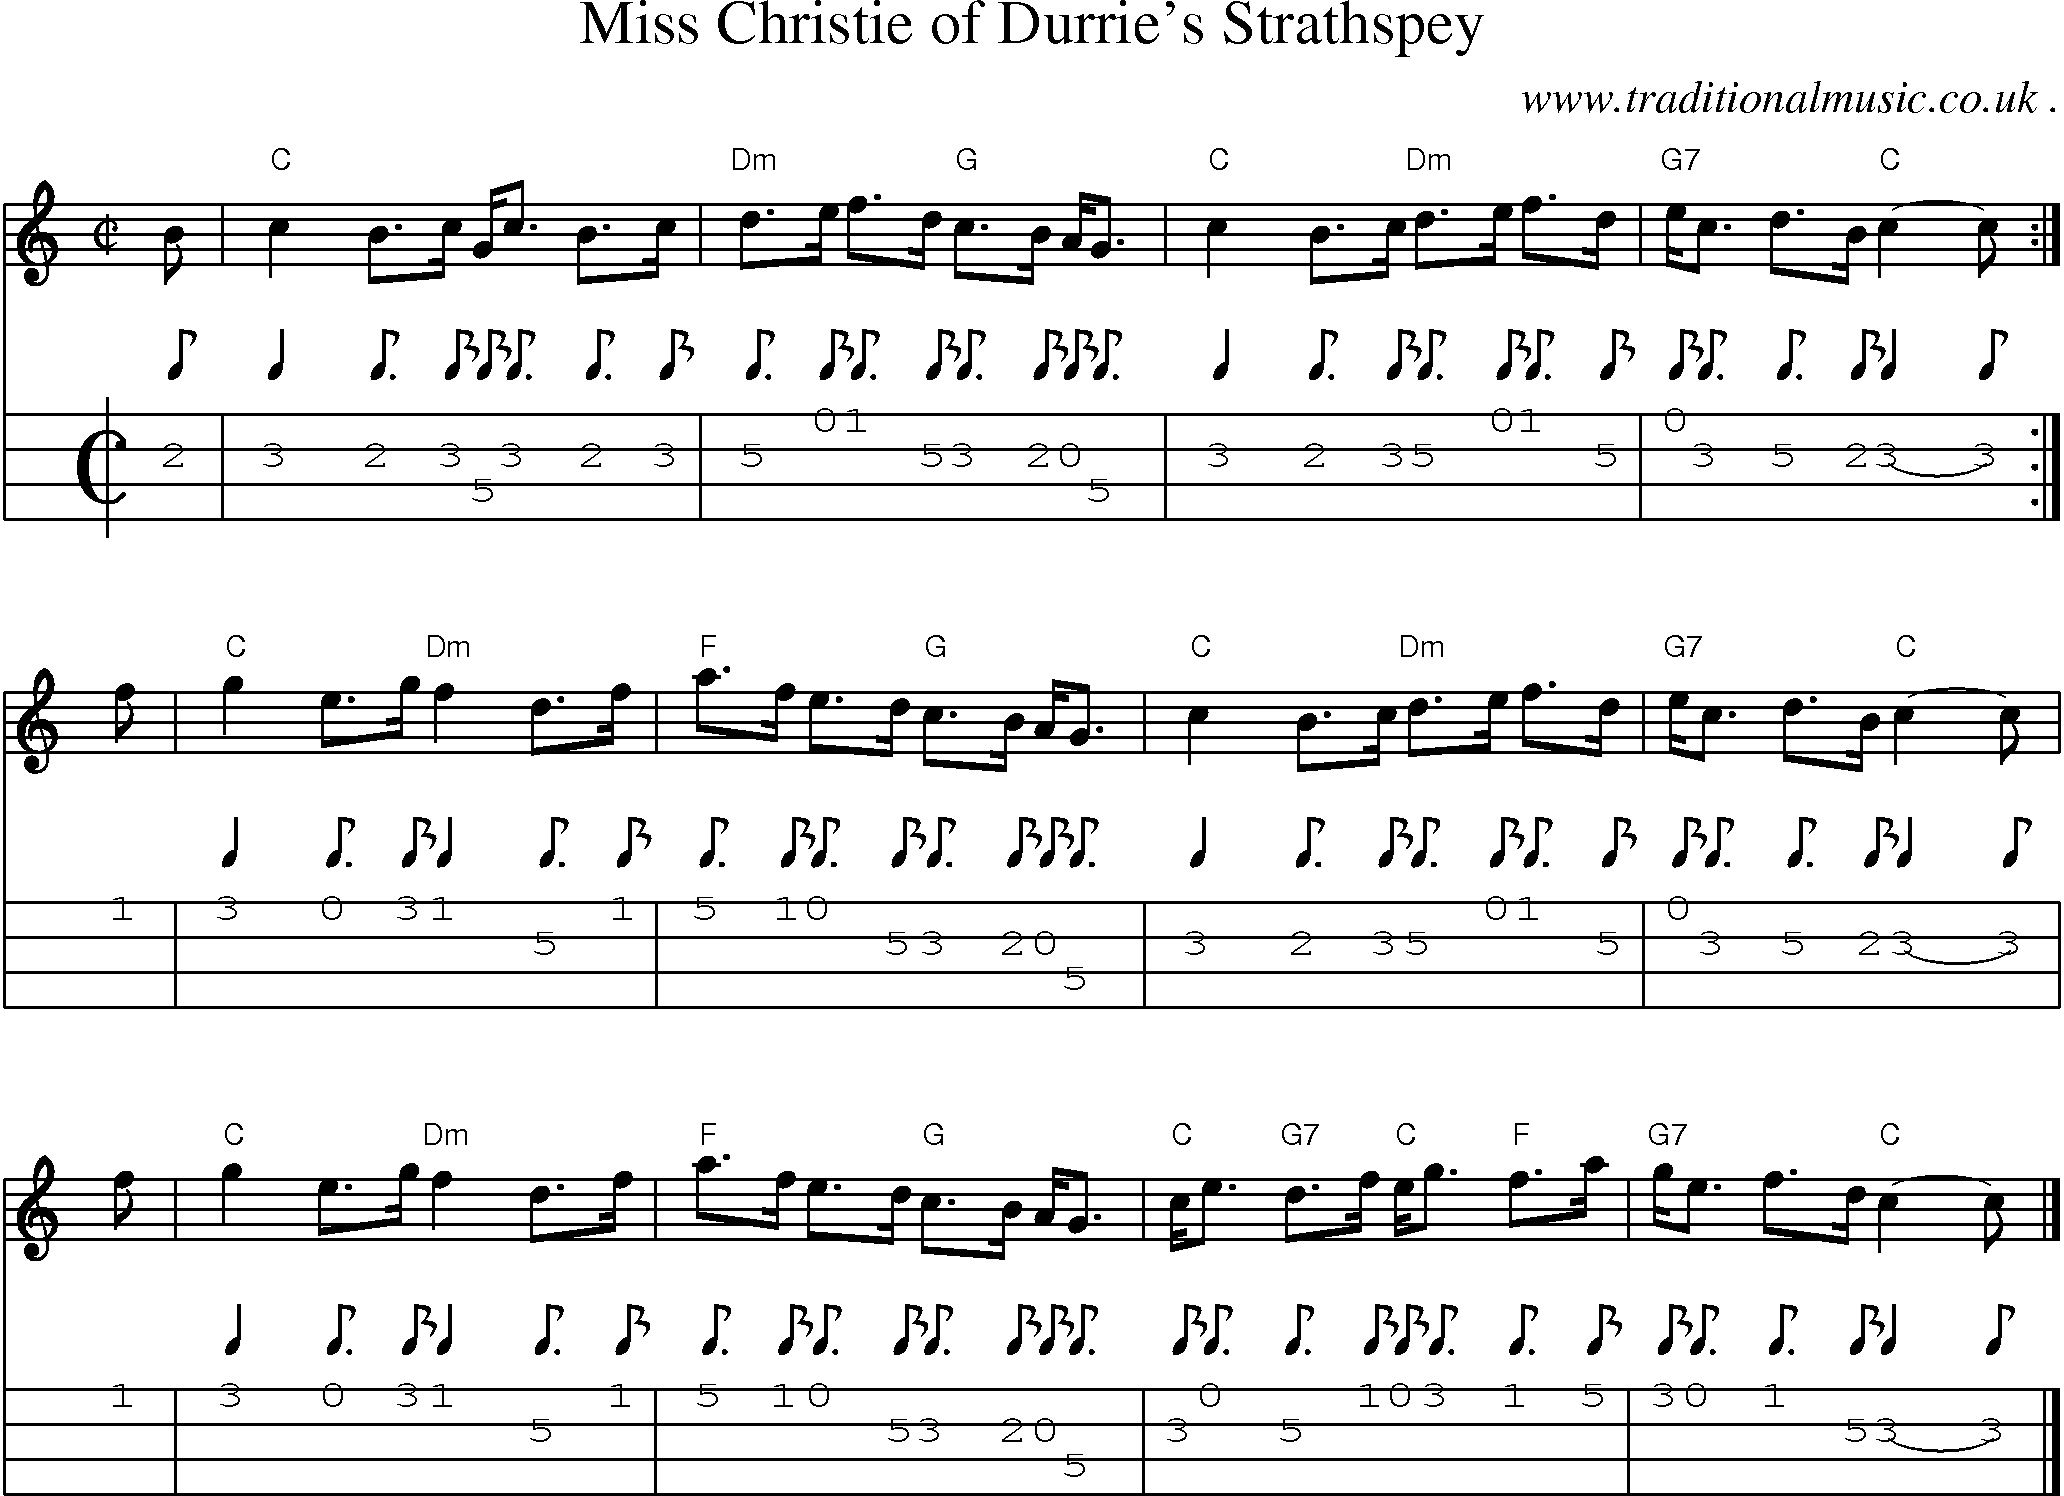 Sheet-music  score, Chords and Mandolin Tabs for Miss Christie Of Durries Strathspey